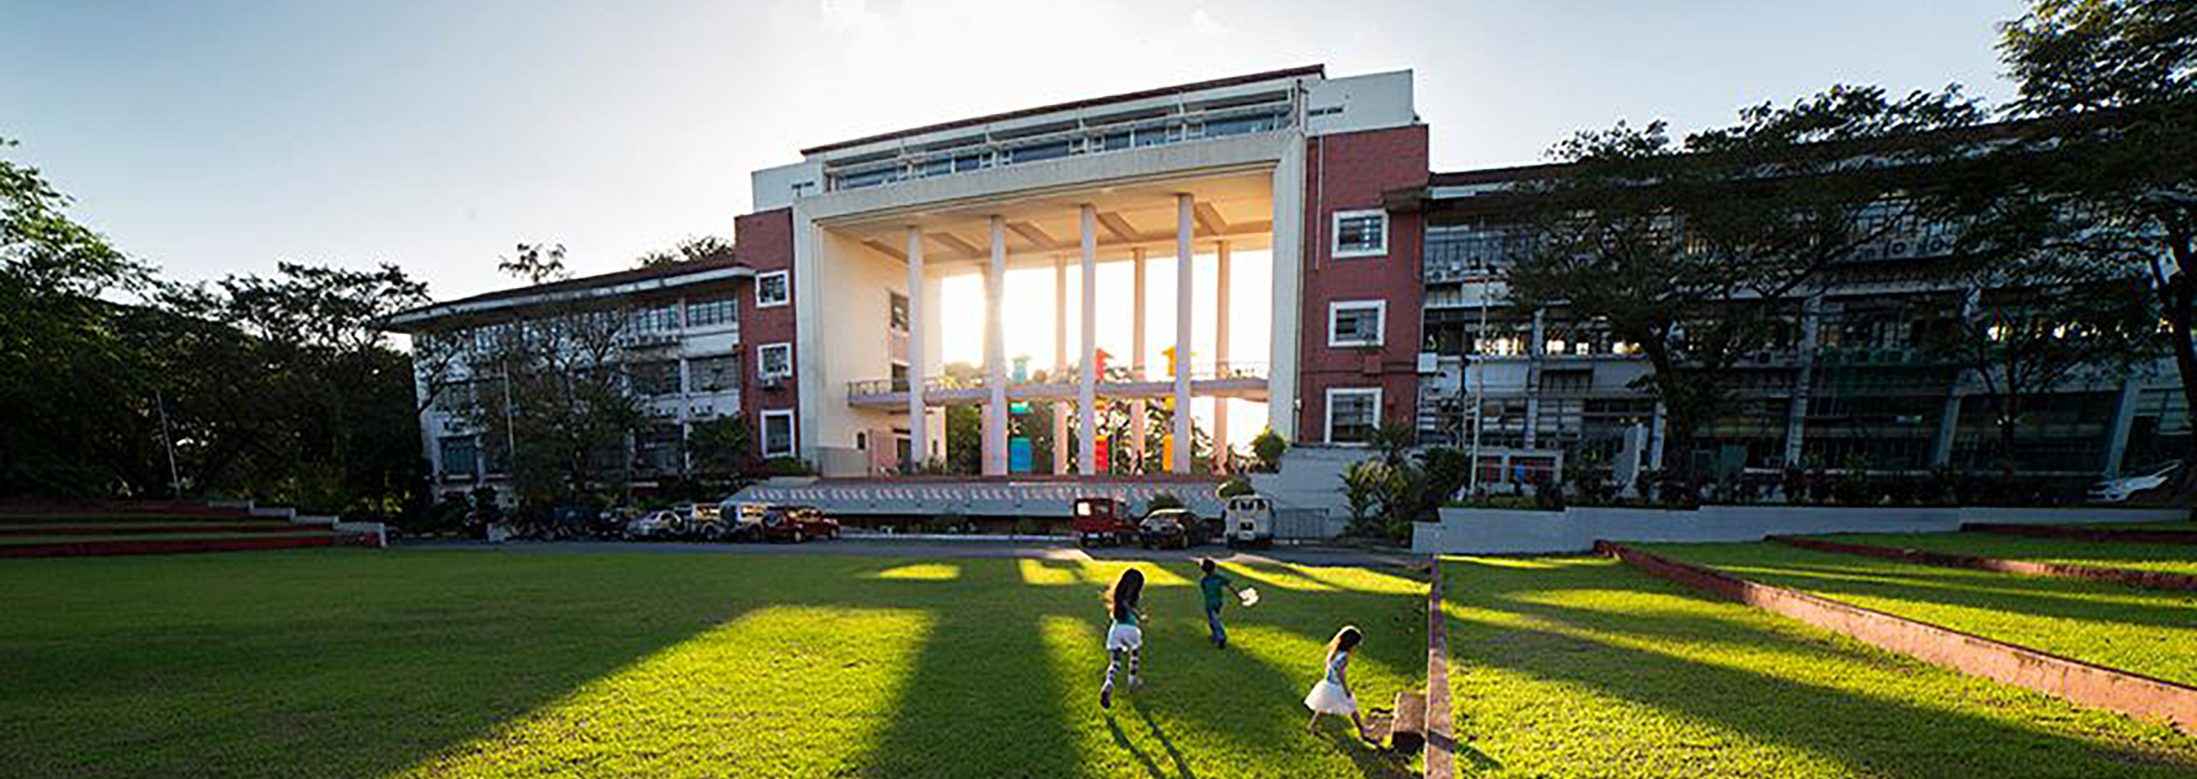 University of Philippines Diliman